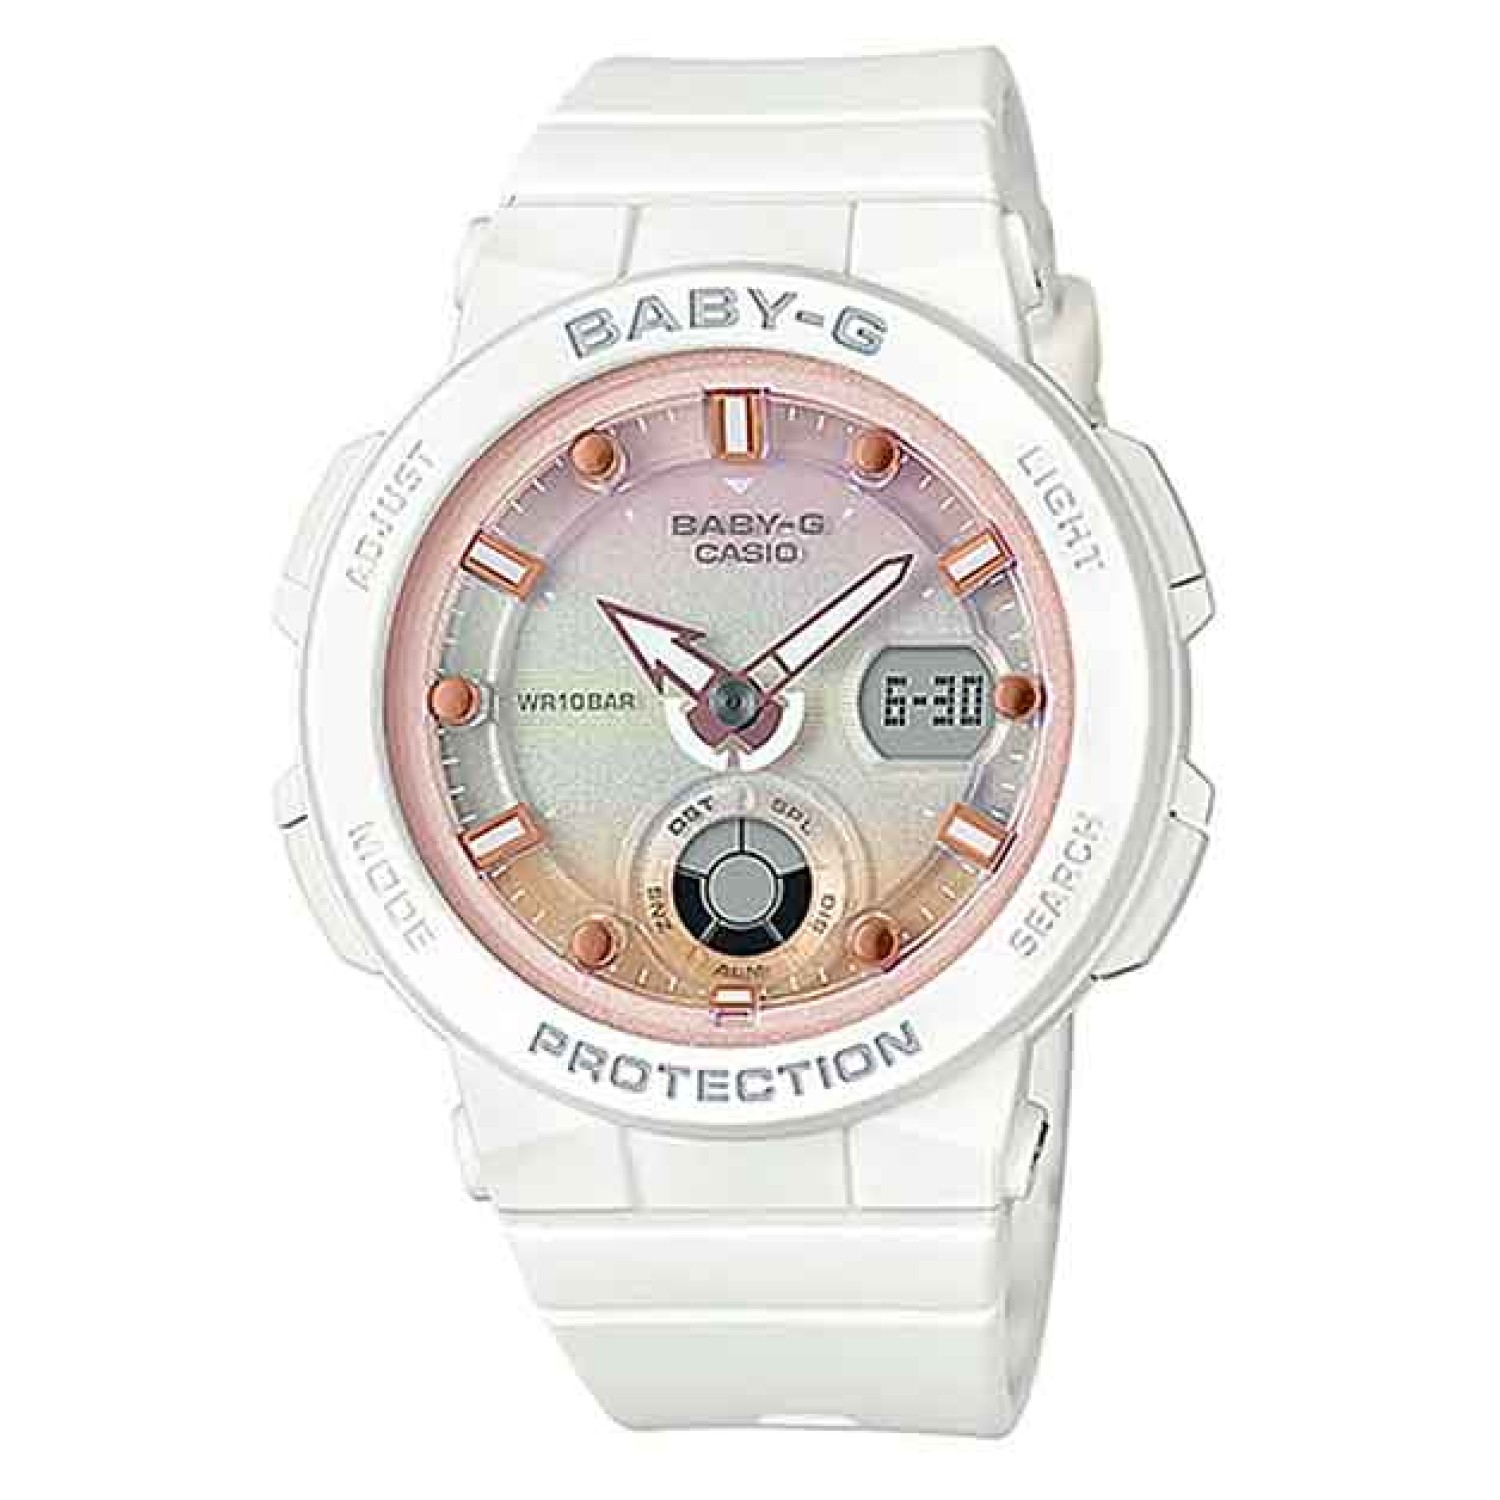 BGA250-7A2 Casio BabY-G  Beach Traveler Series. Introducing a new Beach Traveler Series of summer themed models from BABY-G, the casual watch for active women. Part of a series based on a theme that highlights the beauty of a summertime beach, these model